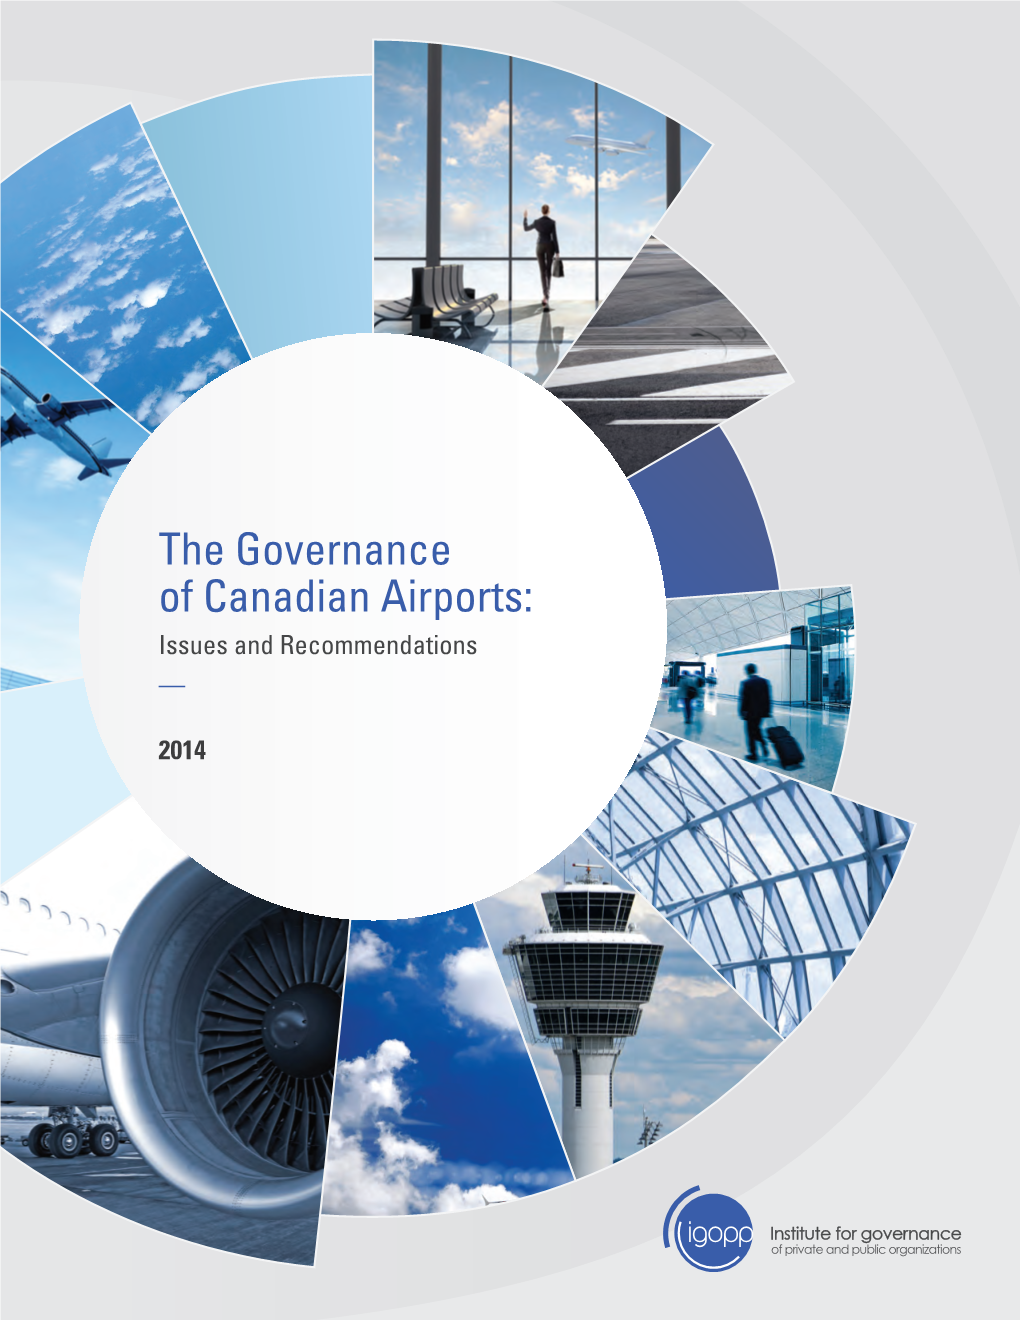 The Governance of Canadian Airports: Issues and Recommendations